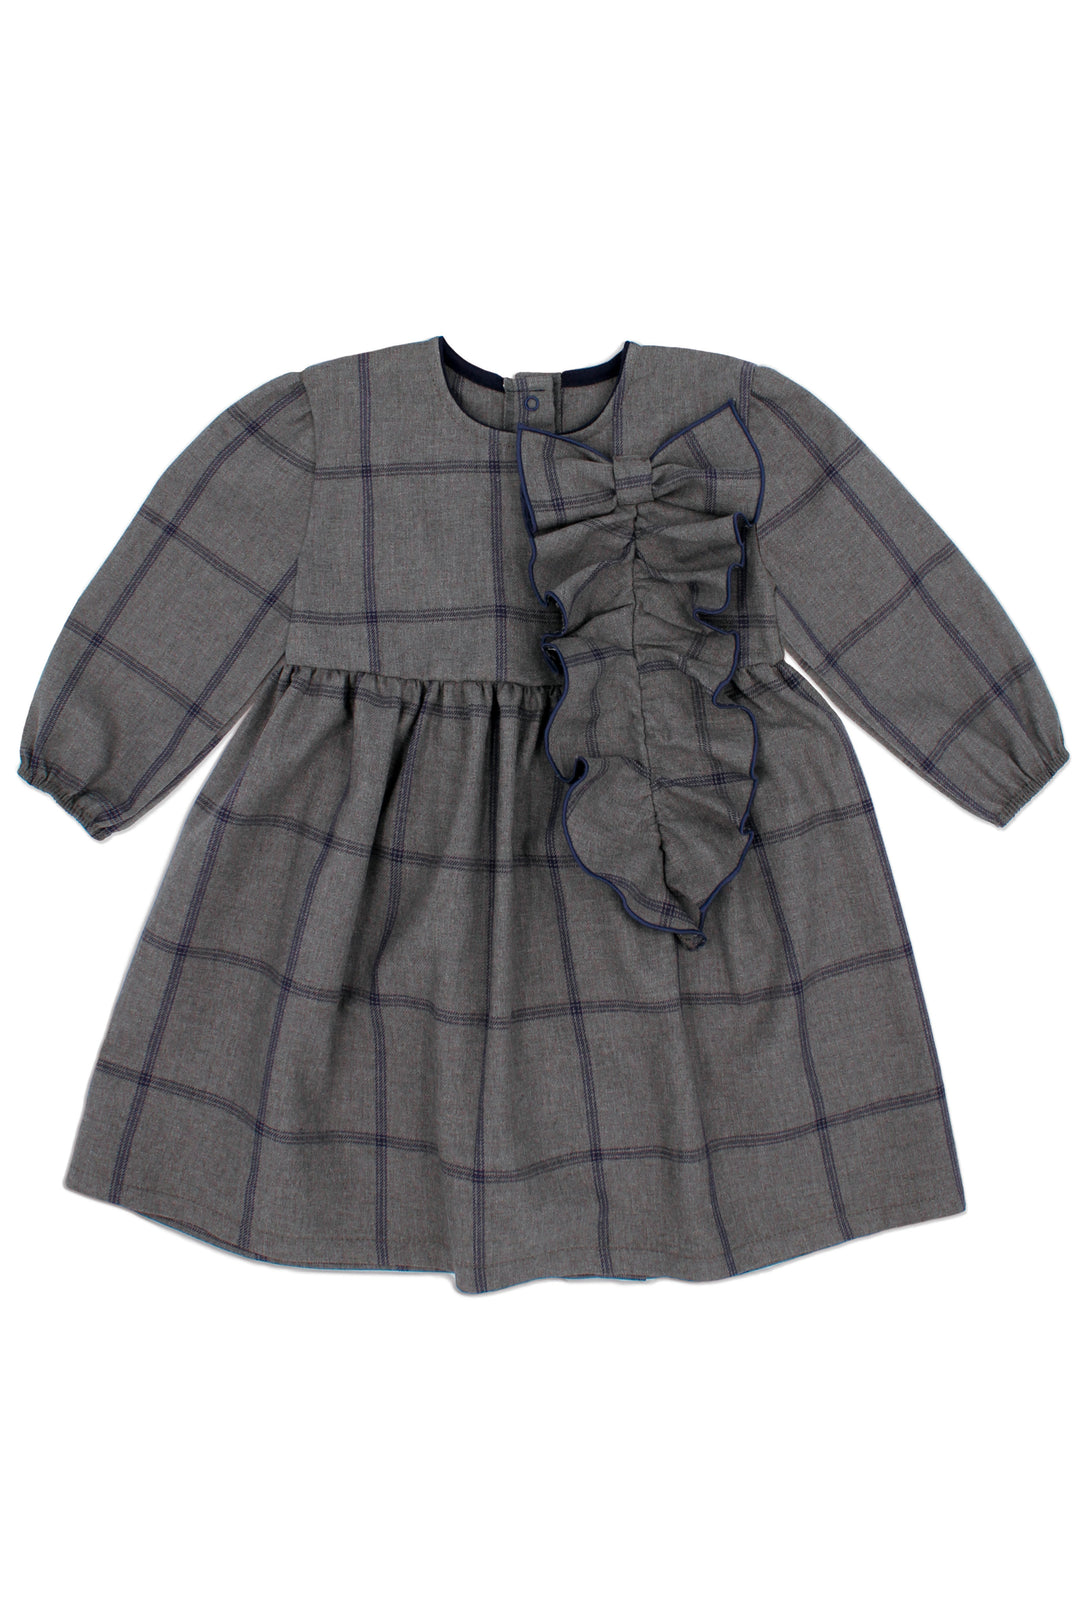 Rapife "Reese" Grey & Navy Check Dress | Millie and John